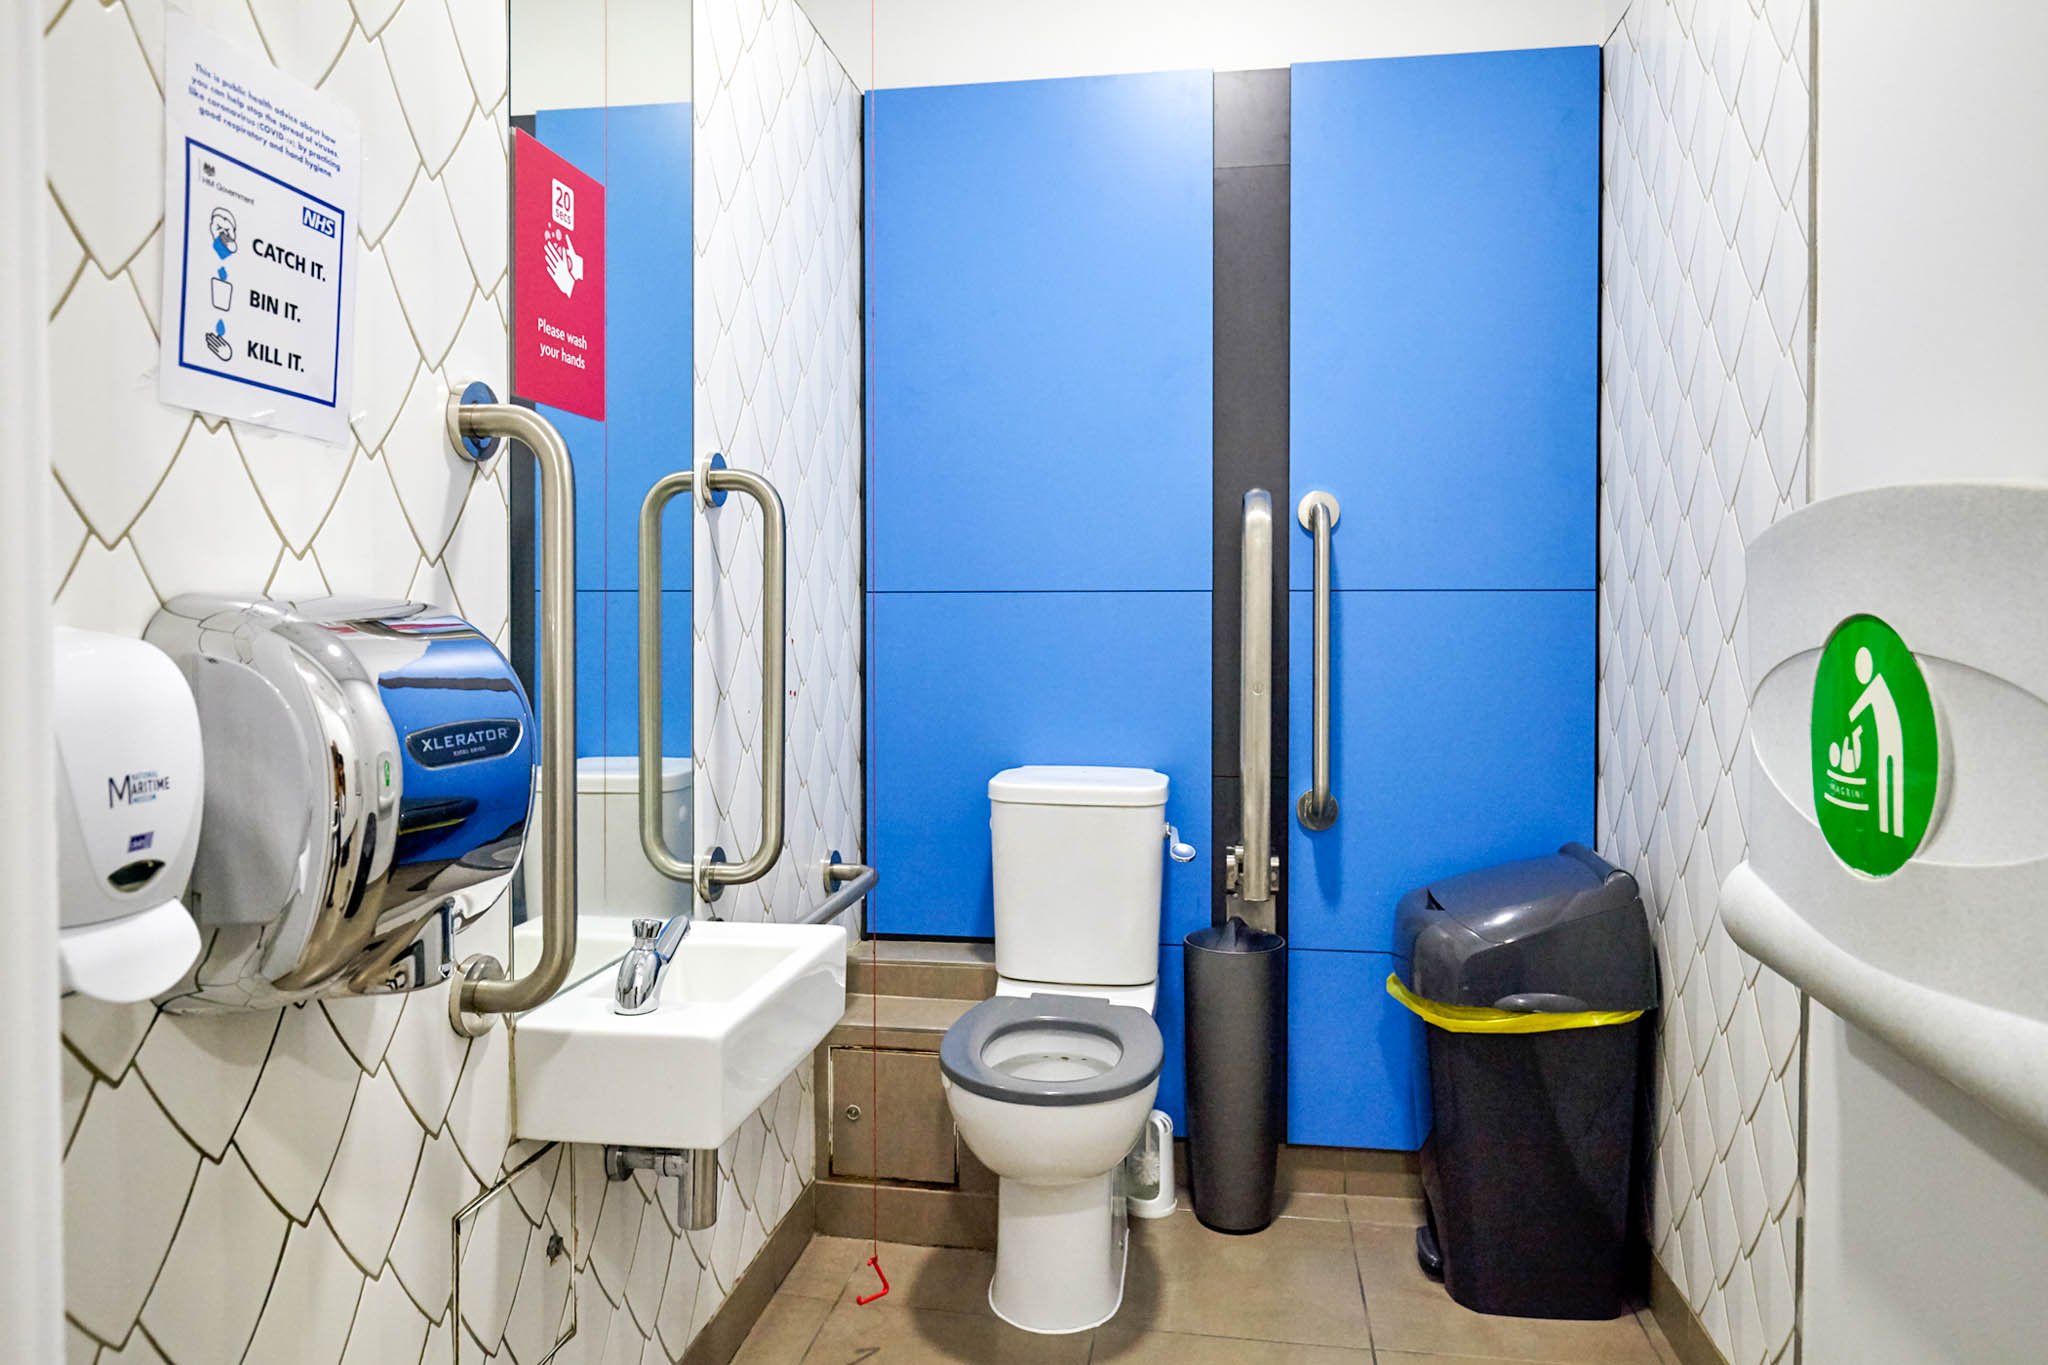 Disabled doc m toilet and baby changing unit with feature tiling at national maritime museum.jpg